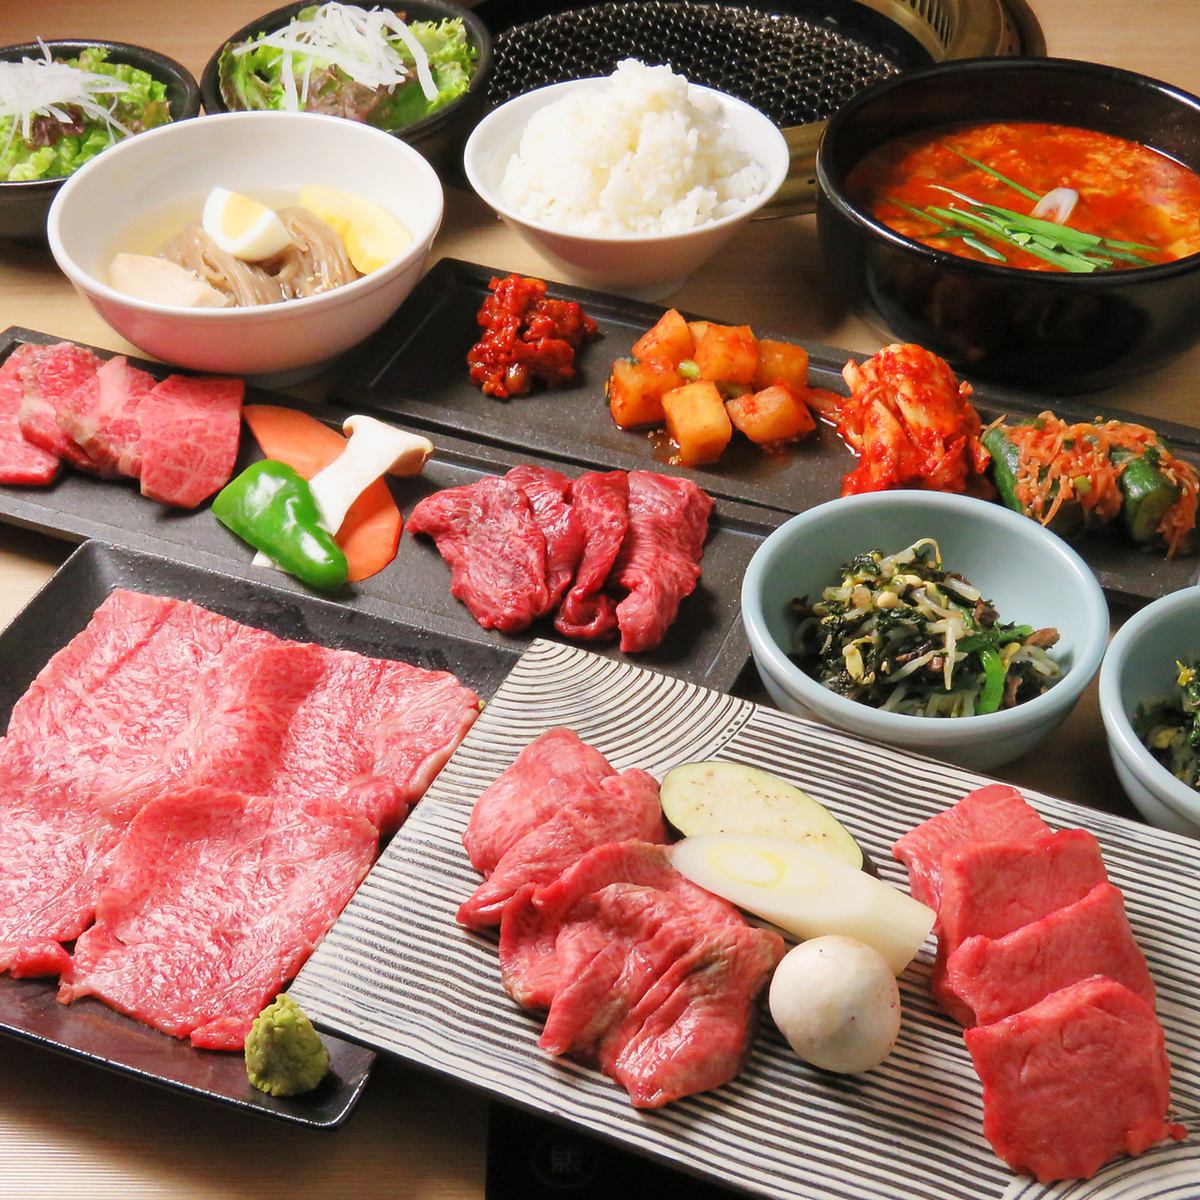 ≪Private rooms available≫ Enjoy our proud Japanese beef! Enjoy our exquisite Yakiniku.